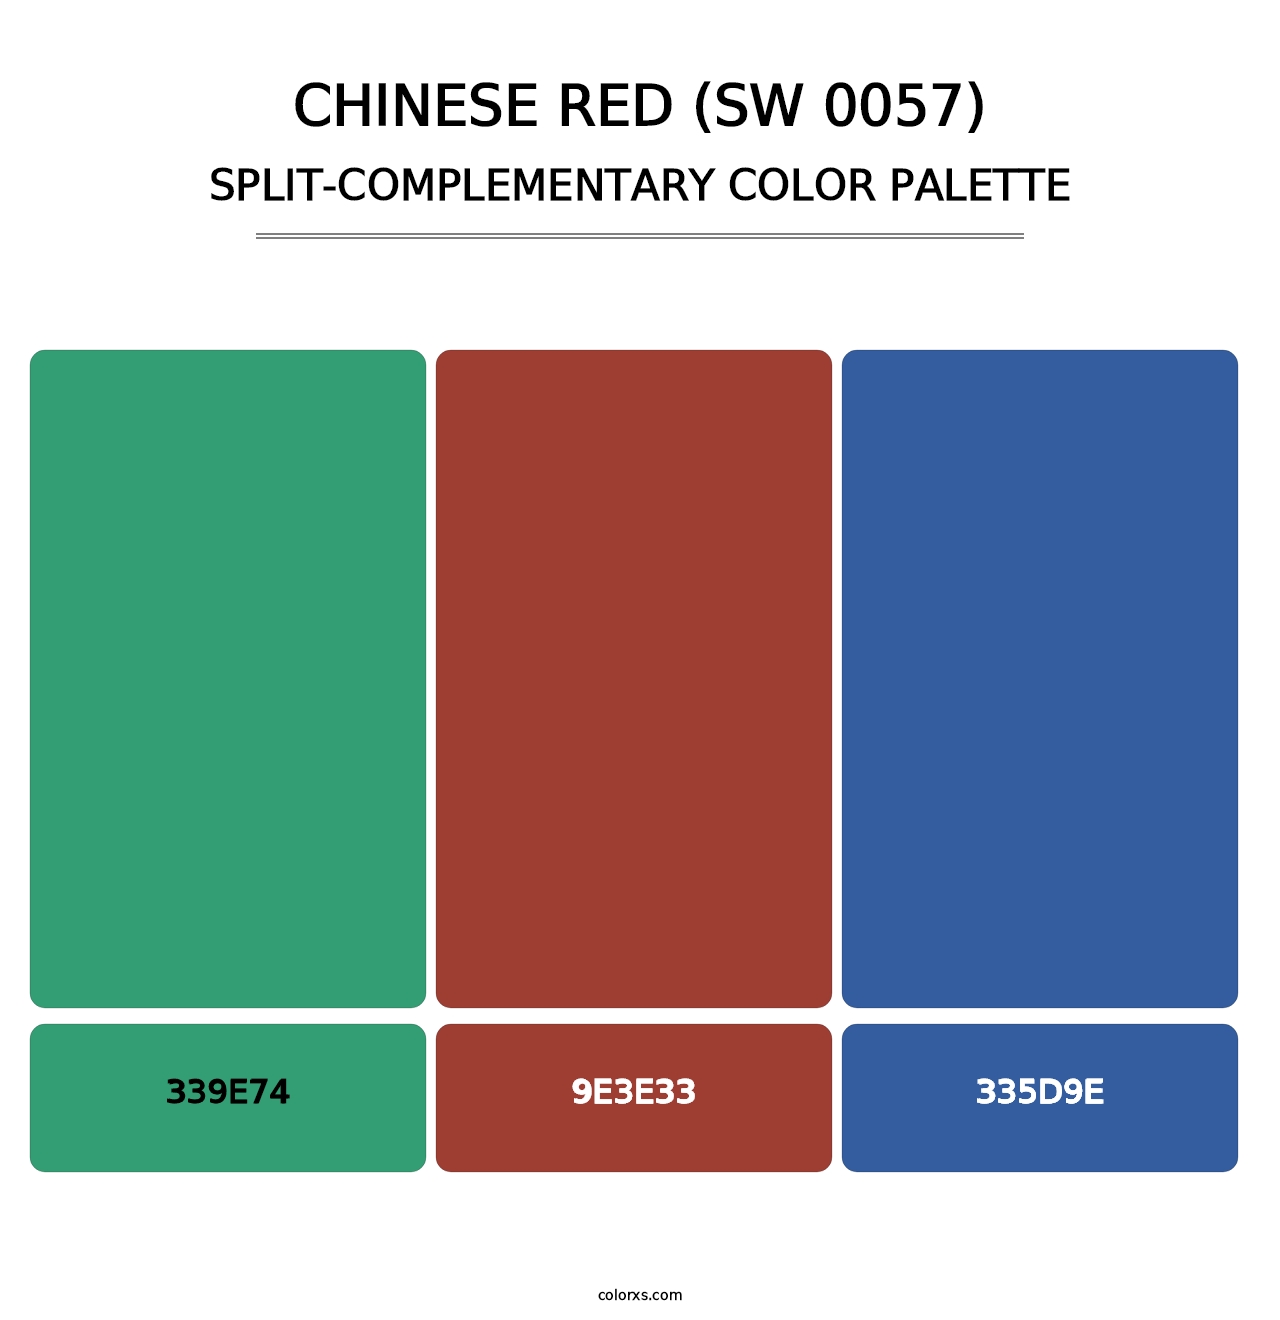 Chinese Red (SW 0057) - Split-Complementary Color Palette